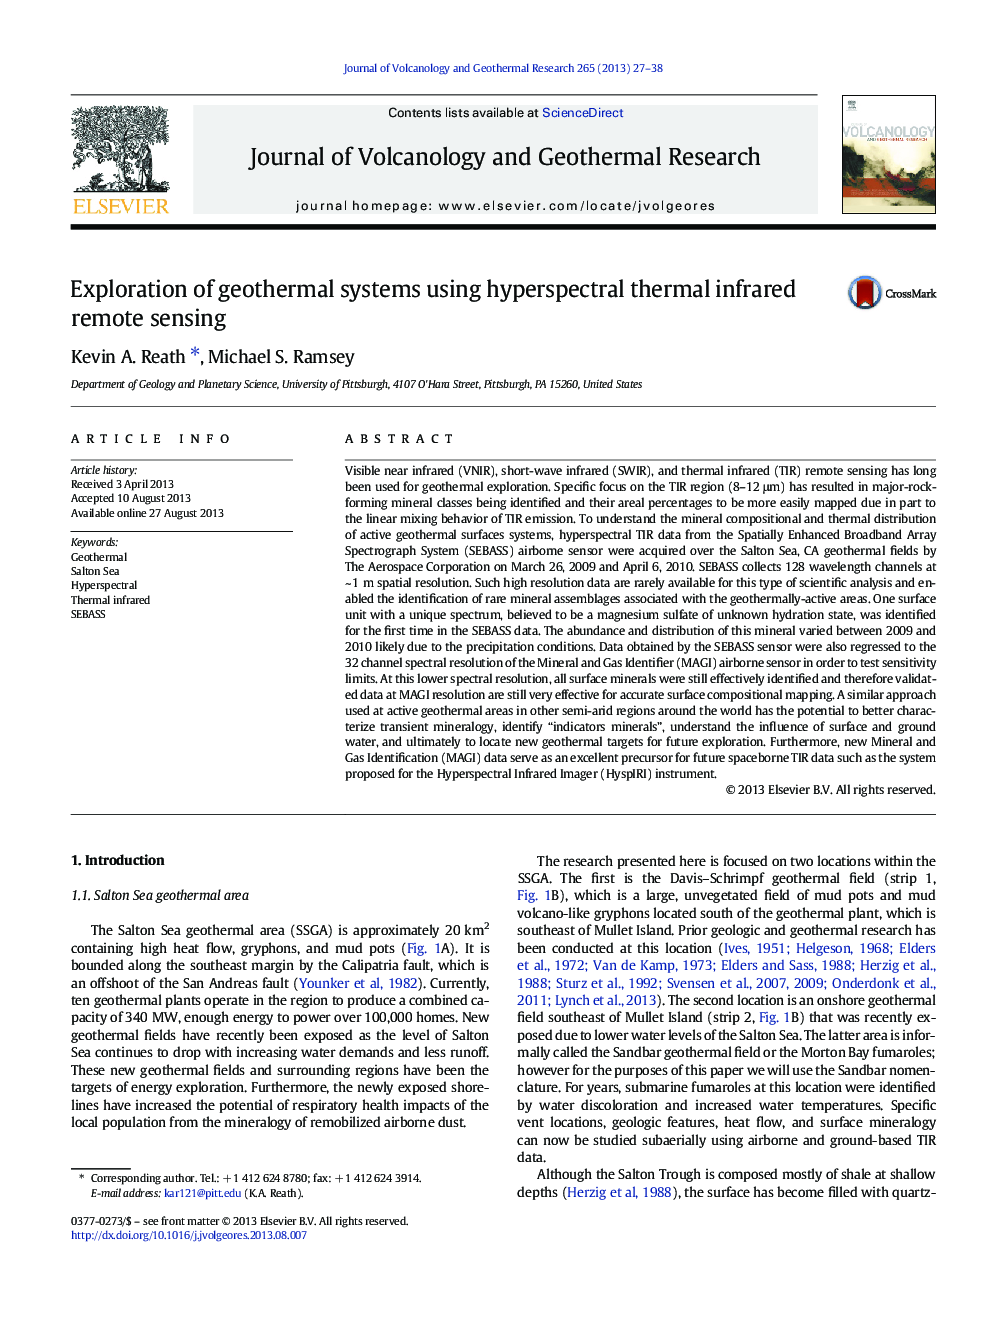 Exploration of geothermal systems using hyperspectral thermal infrared remote sensing